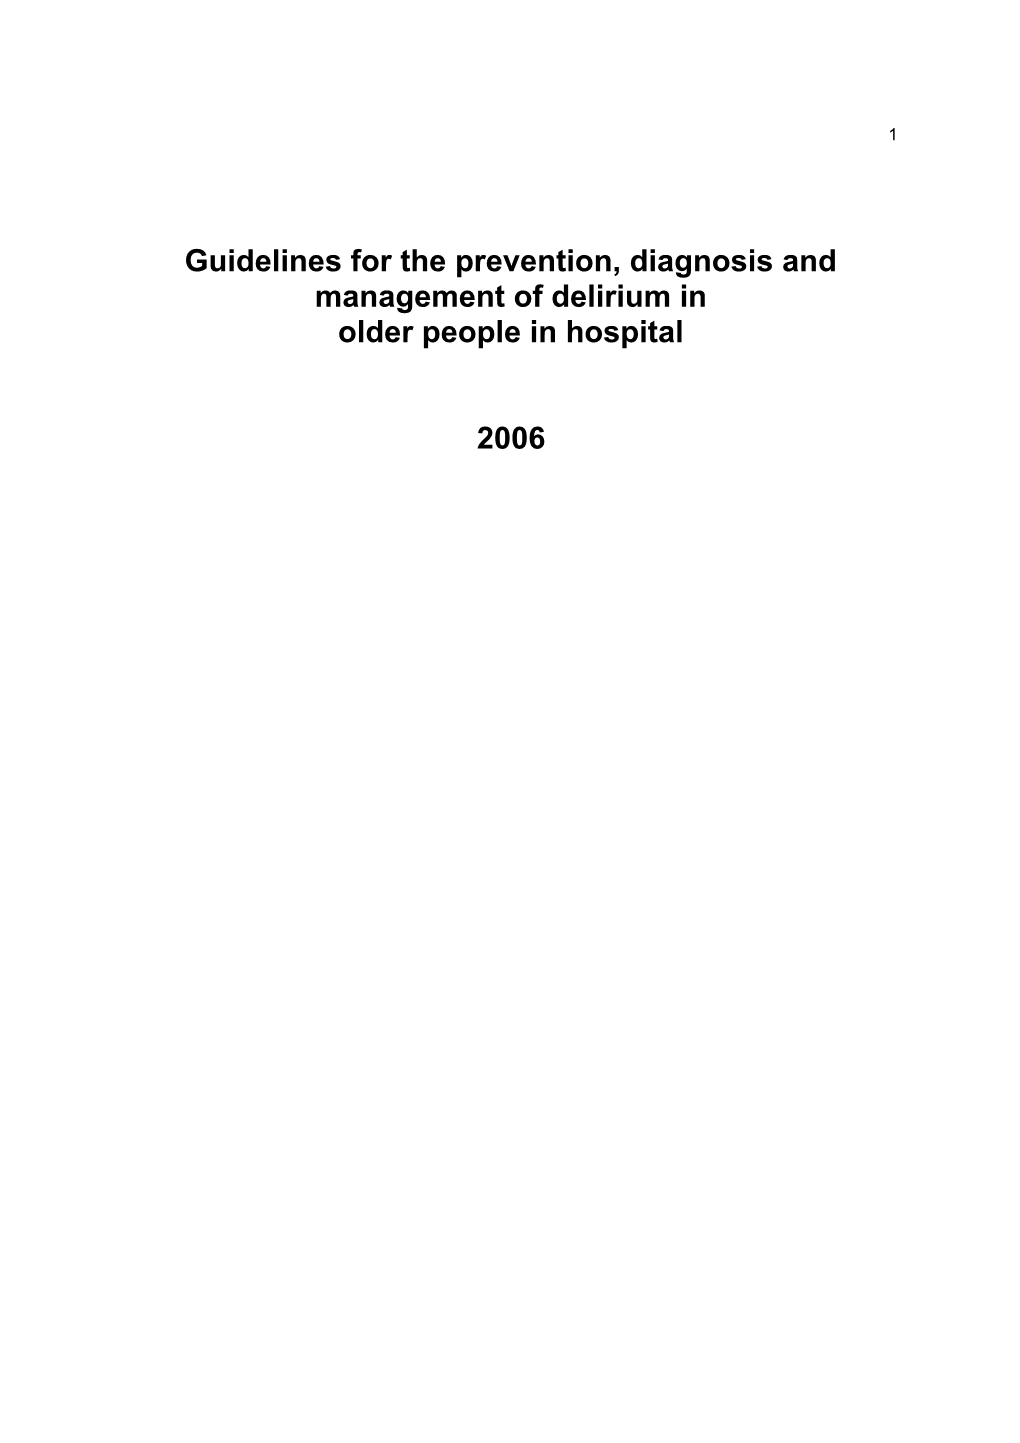 Guidelines for the Diagnosis And